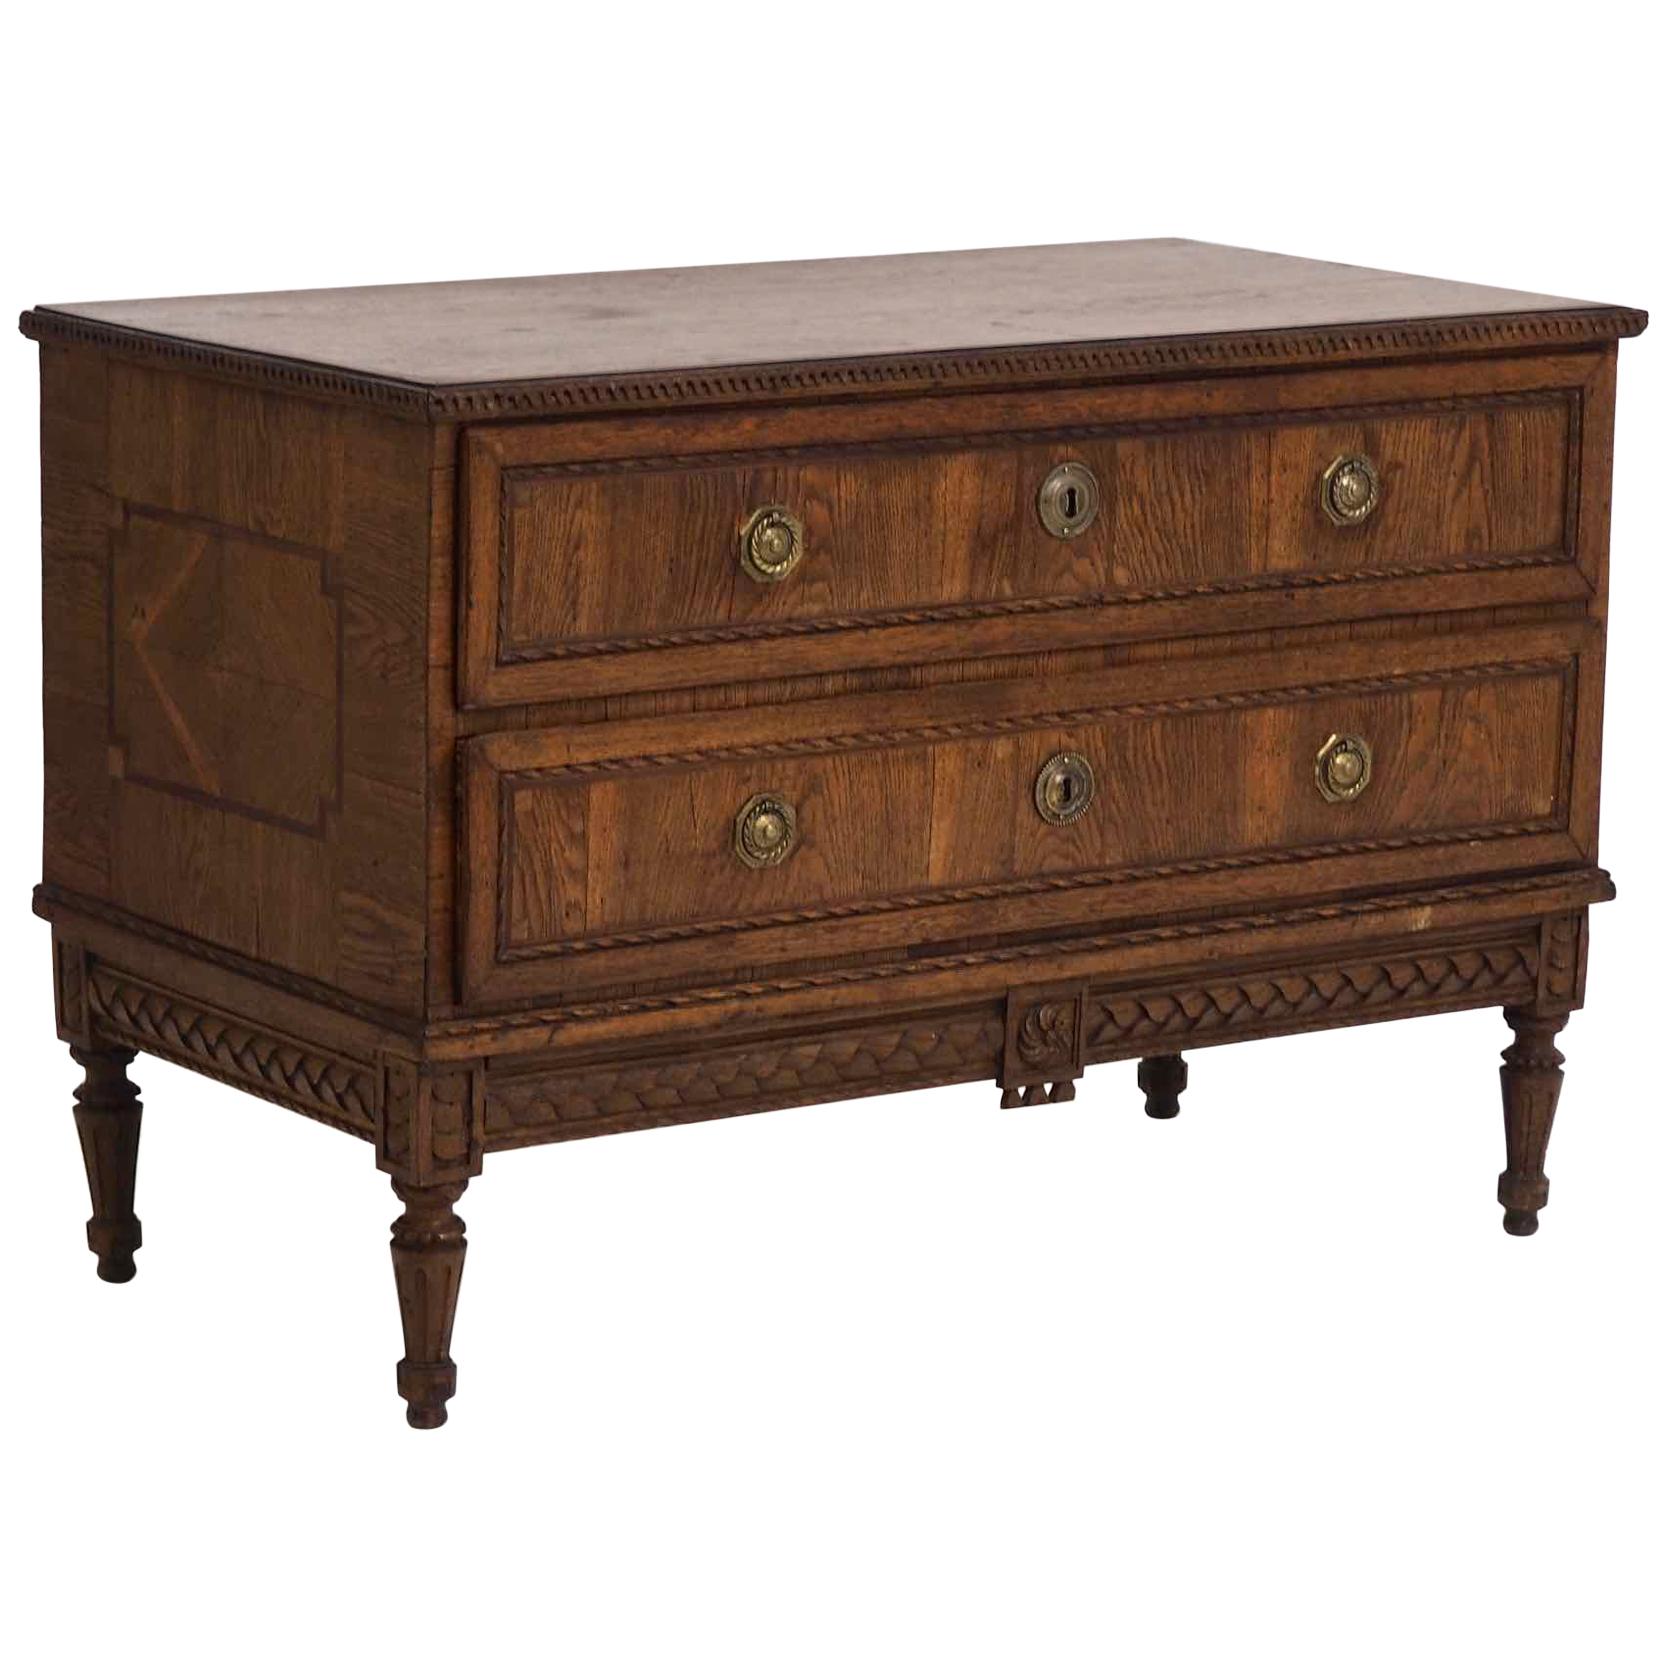 Fine Italian or French Louis Seize Chest in Fruitwood, 1790